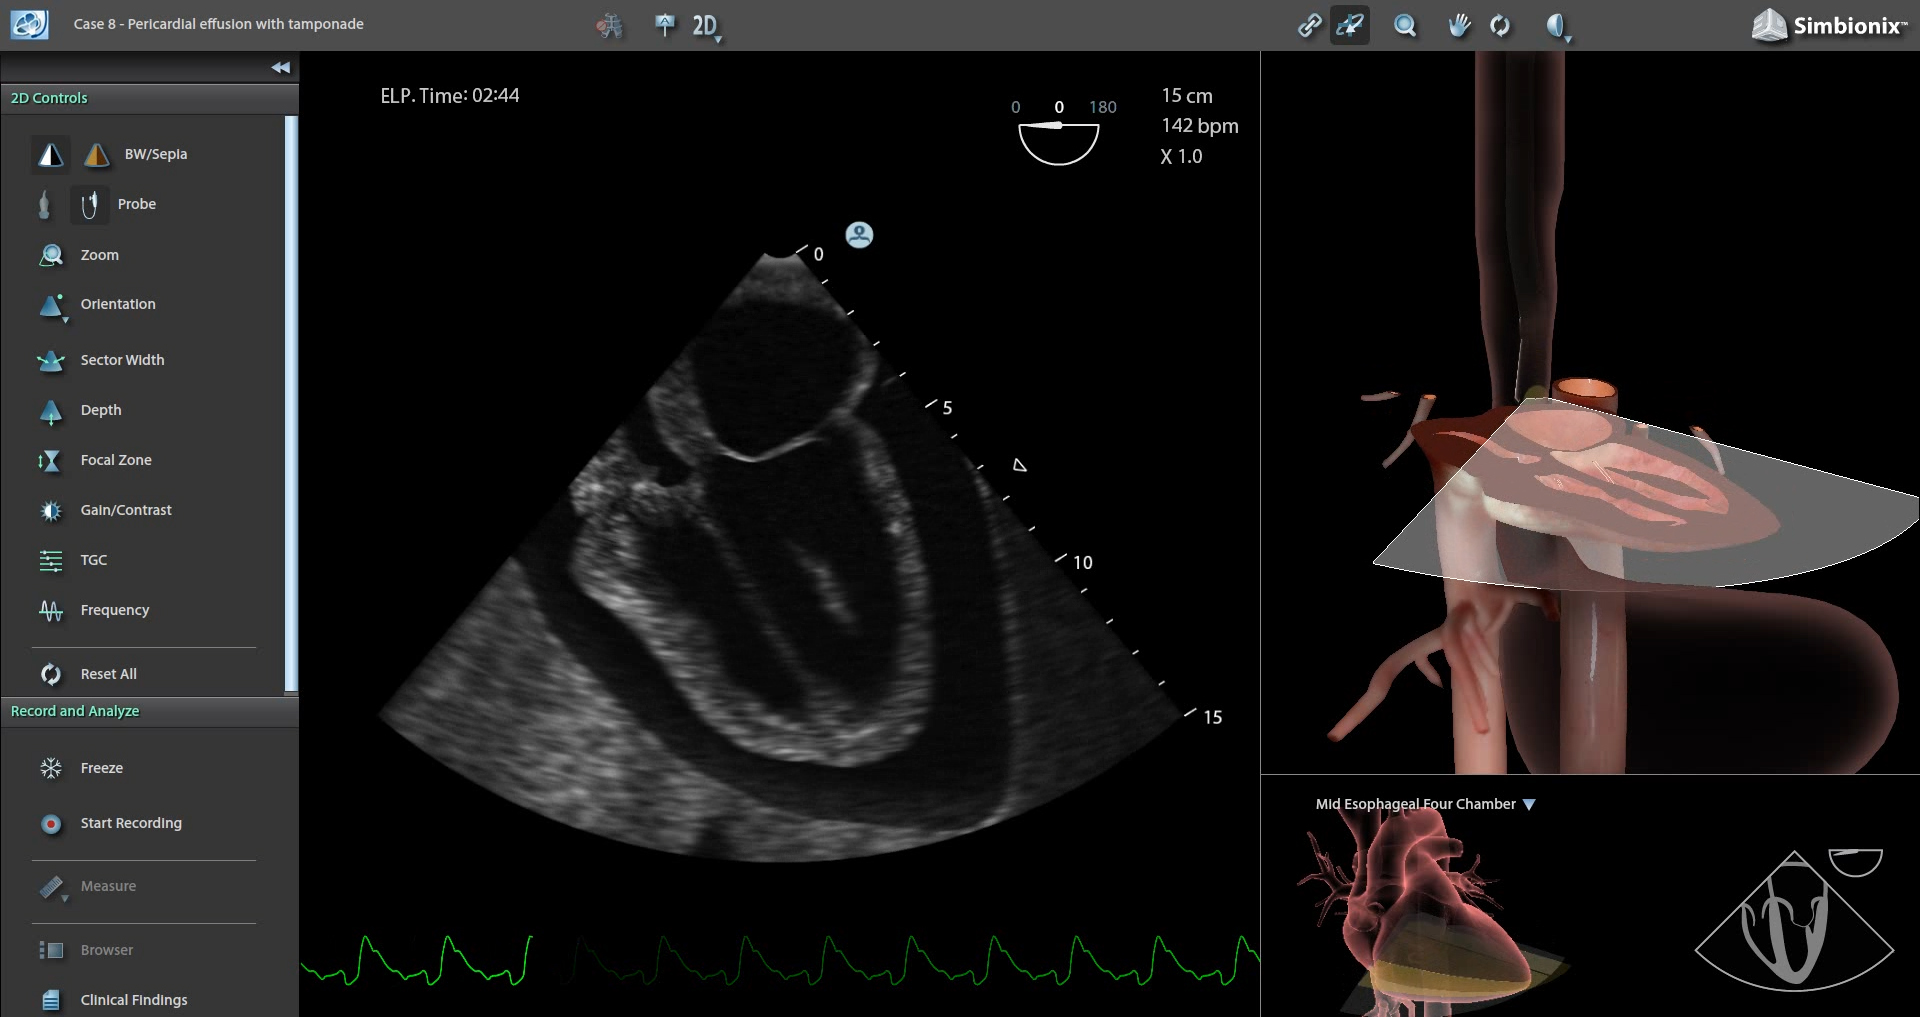 Video- Pericardial Effusion with Temponade